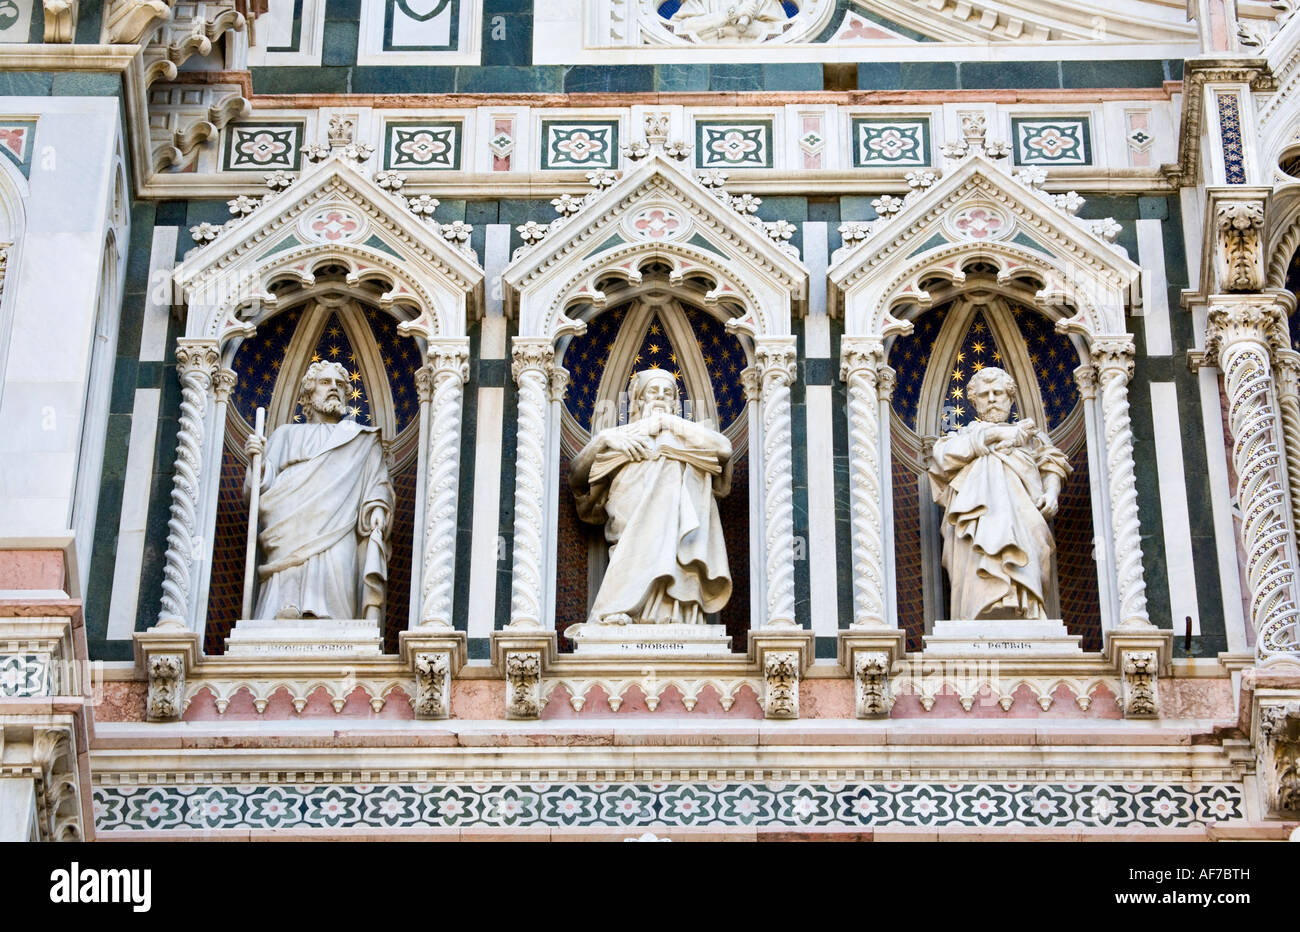 Religious statues on the main facade of Santa Maria del Fiore cathedral (Duomo) Florence, Italy Stock Photo